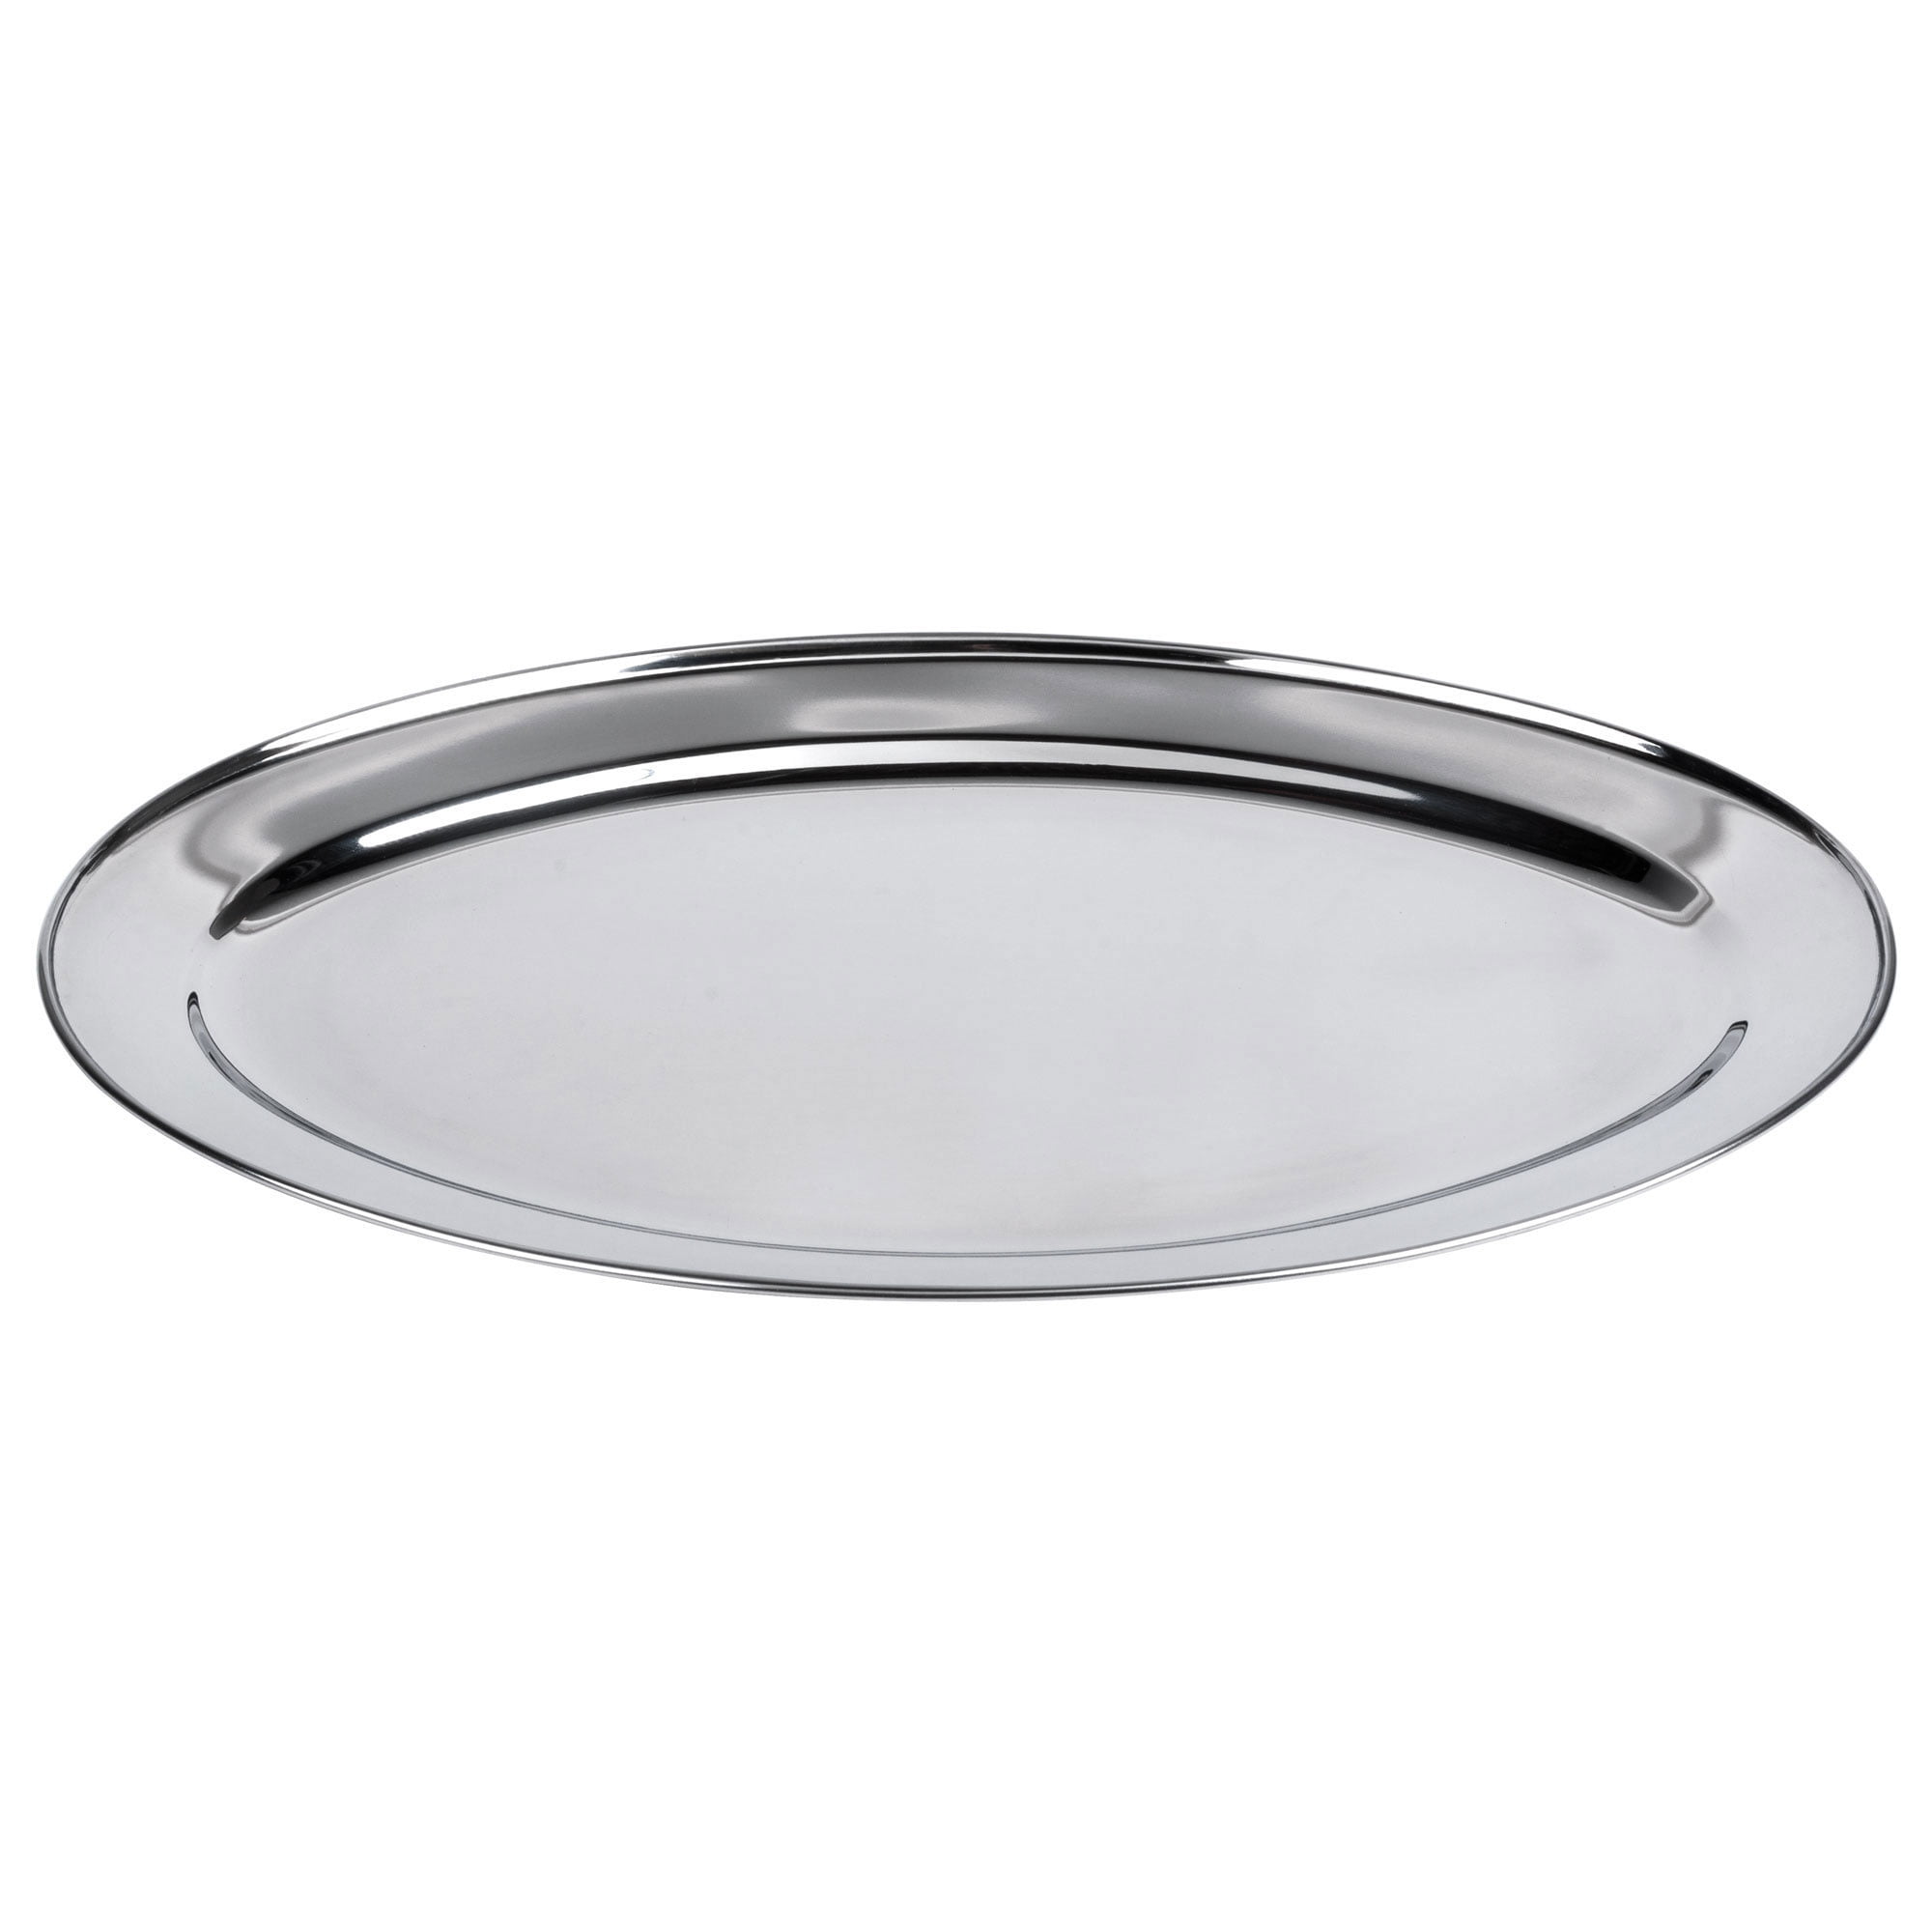 Old World Cuisine *NEW* Small Oval Platter 10 x 6 inch Stainless Steel Platter 